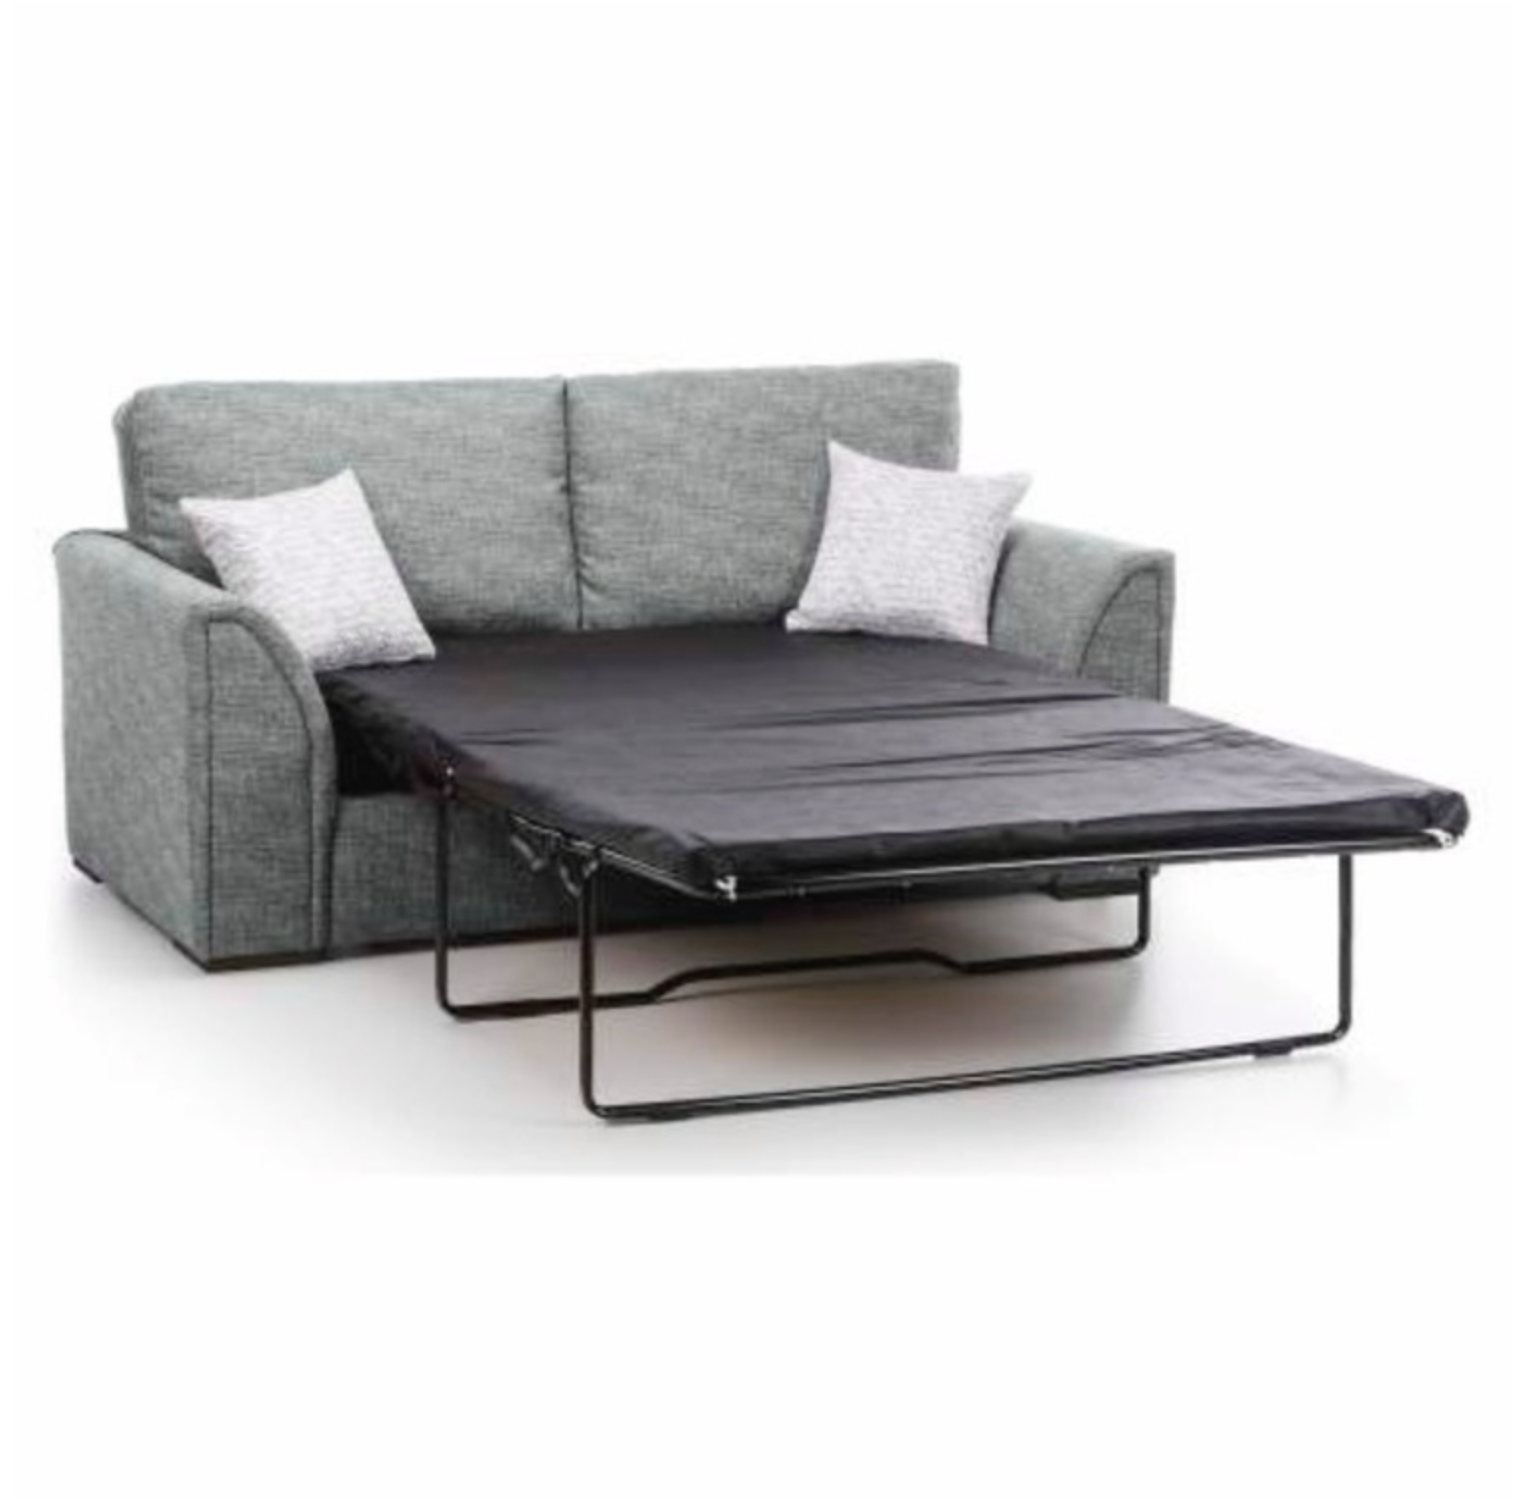 Healy 3 Seater Sofa Bed Como Charcoal Fabric